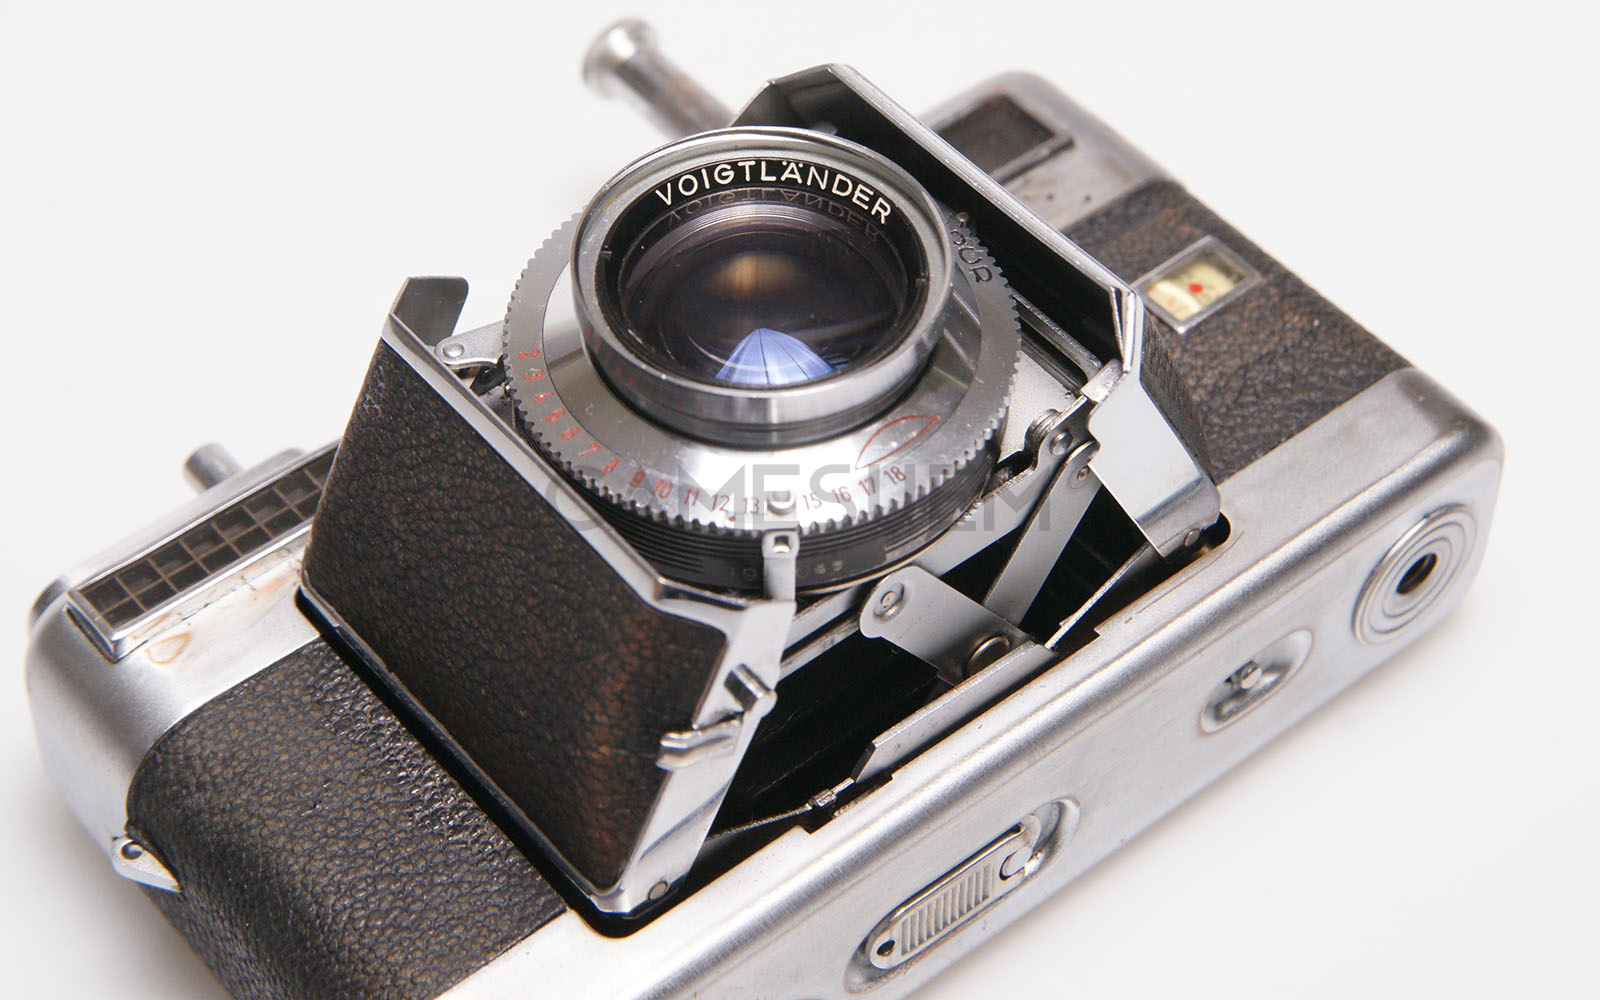 Voigtlander Vitessa represents one of the most famous cameras in 